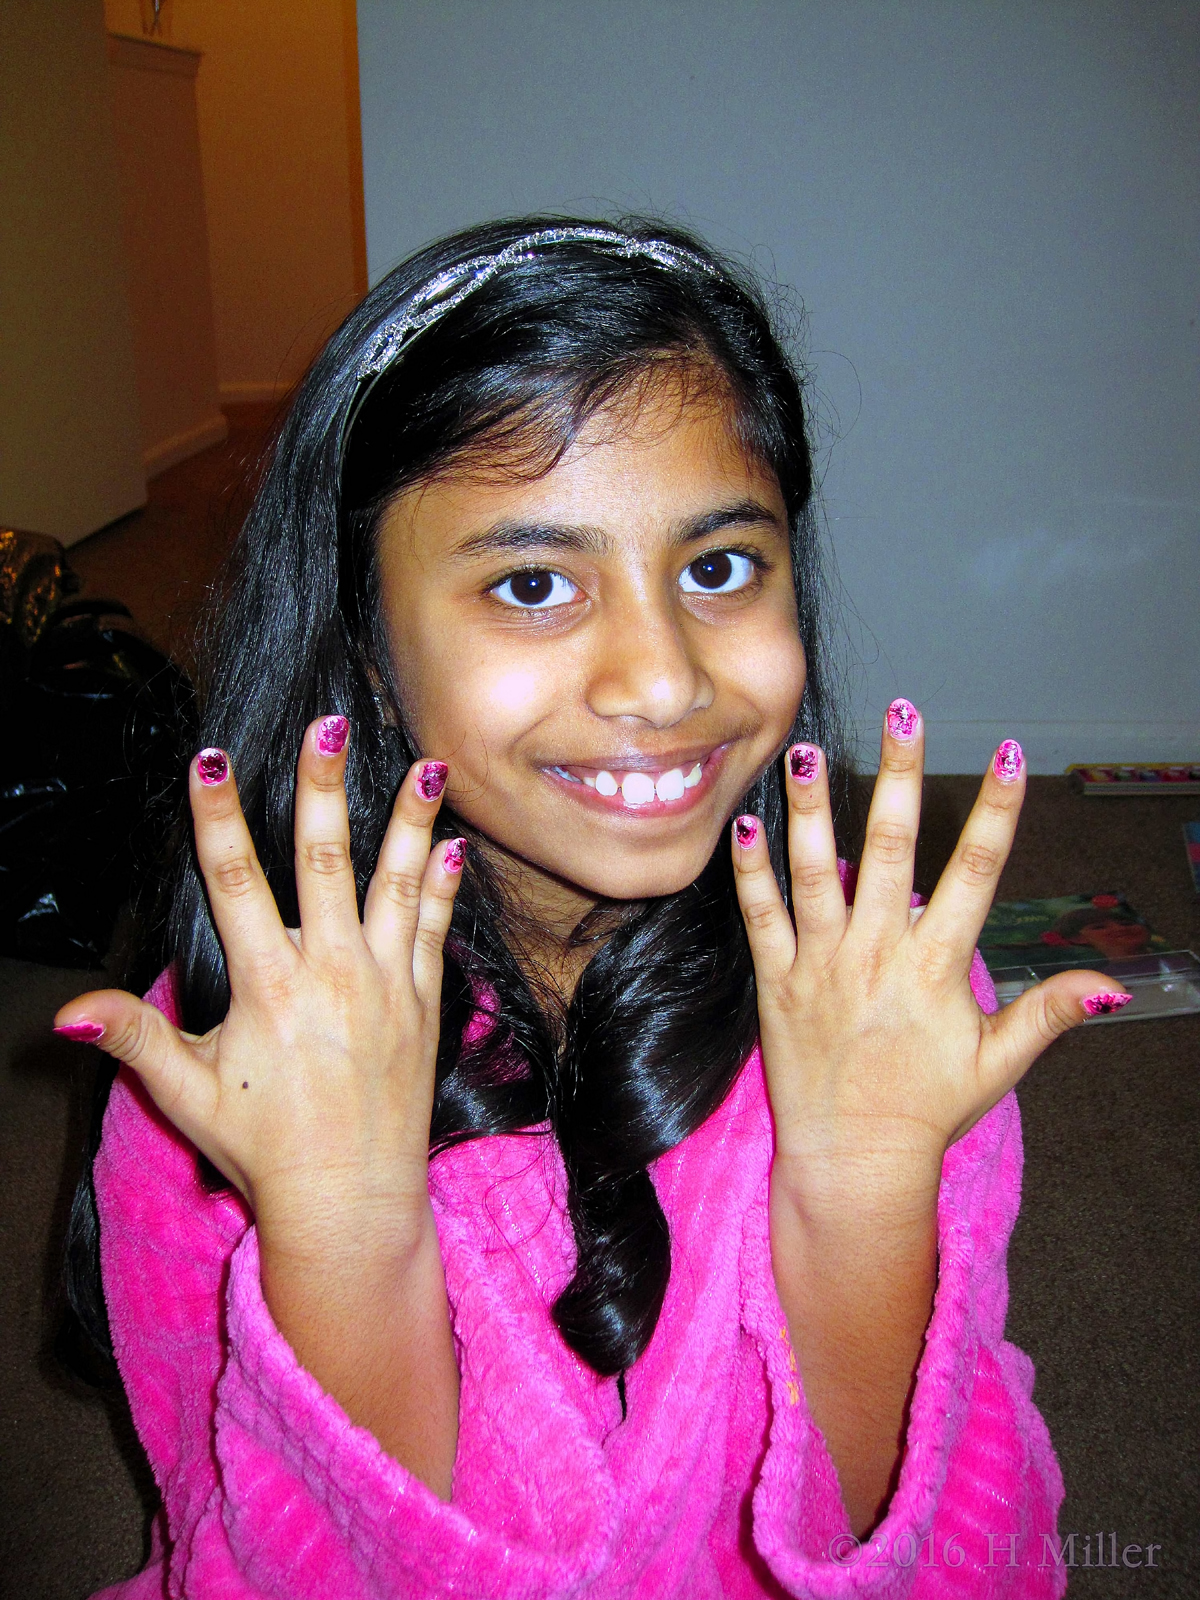 The Birthday Girl Smiling With Her New Mini Mani. 